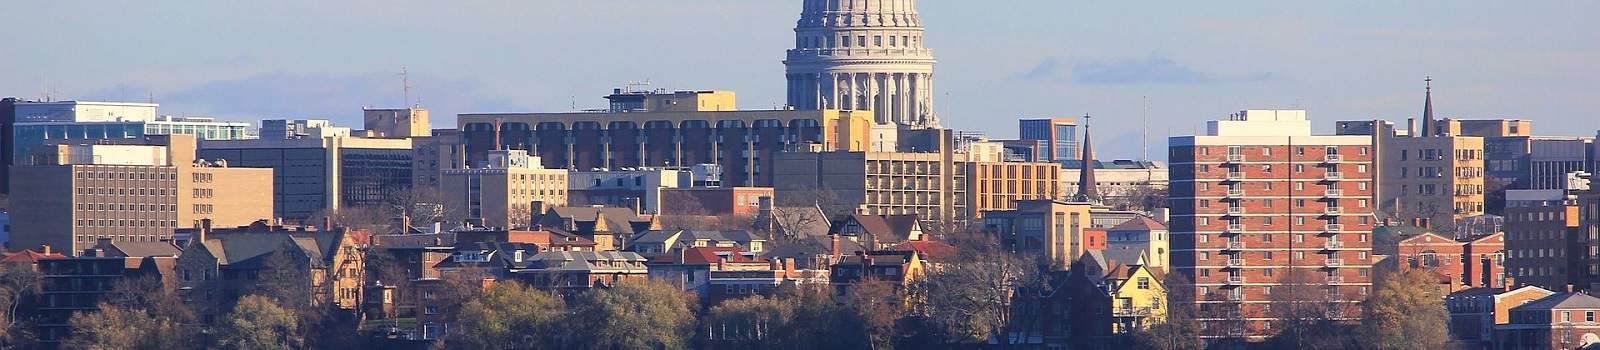 madison wisconsin state capital